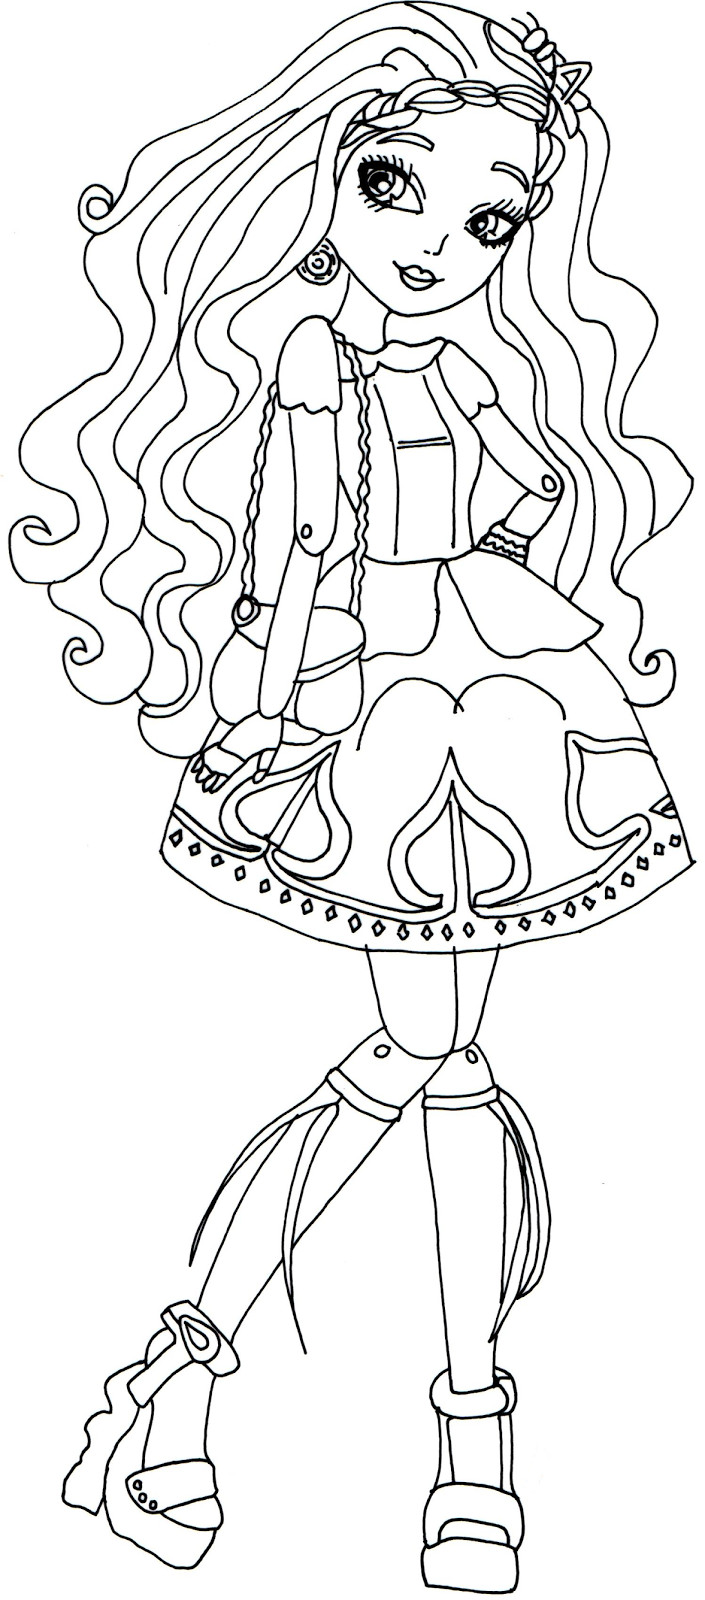 Printable Coloring Books
 Free Printable Ever After High Coloring Pages Cedar Wood